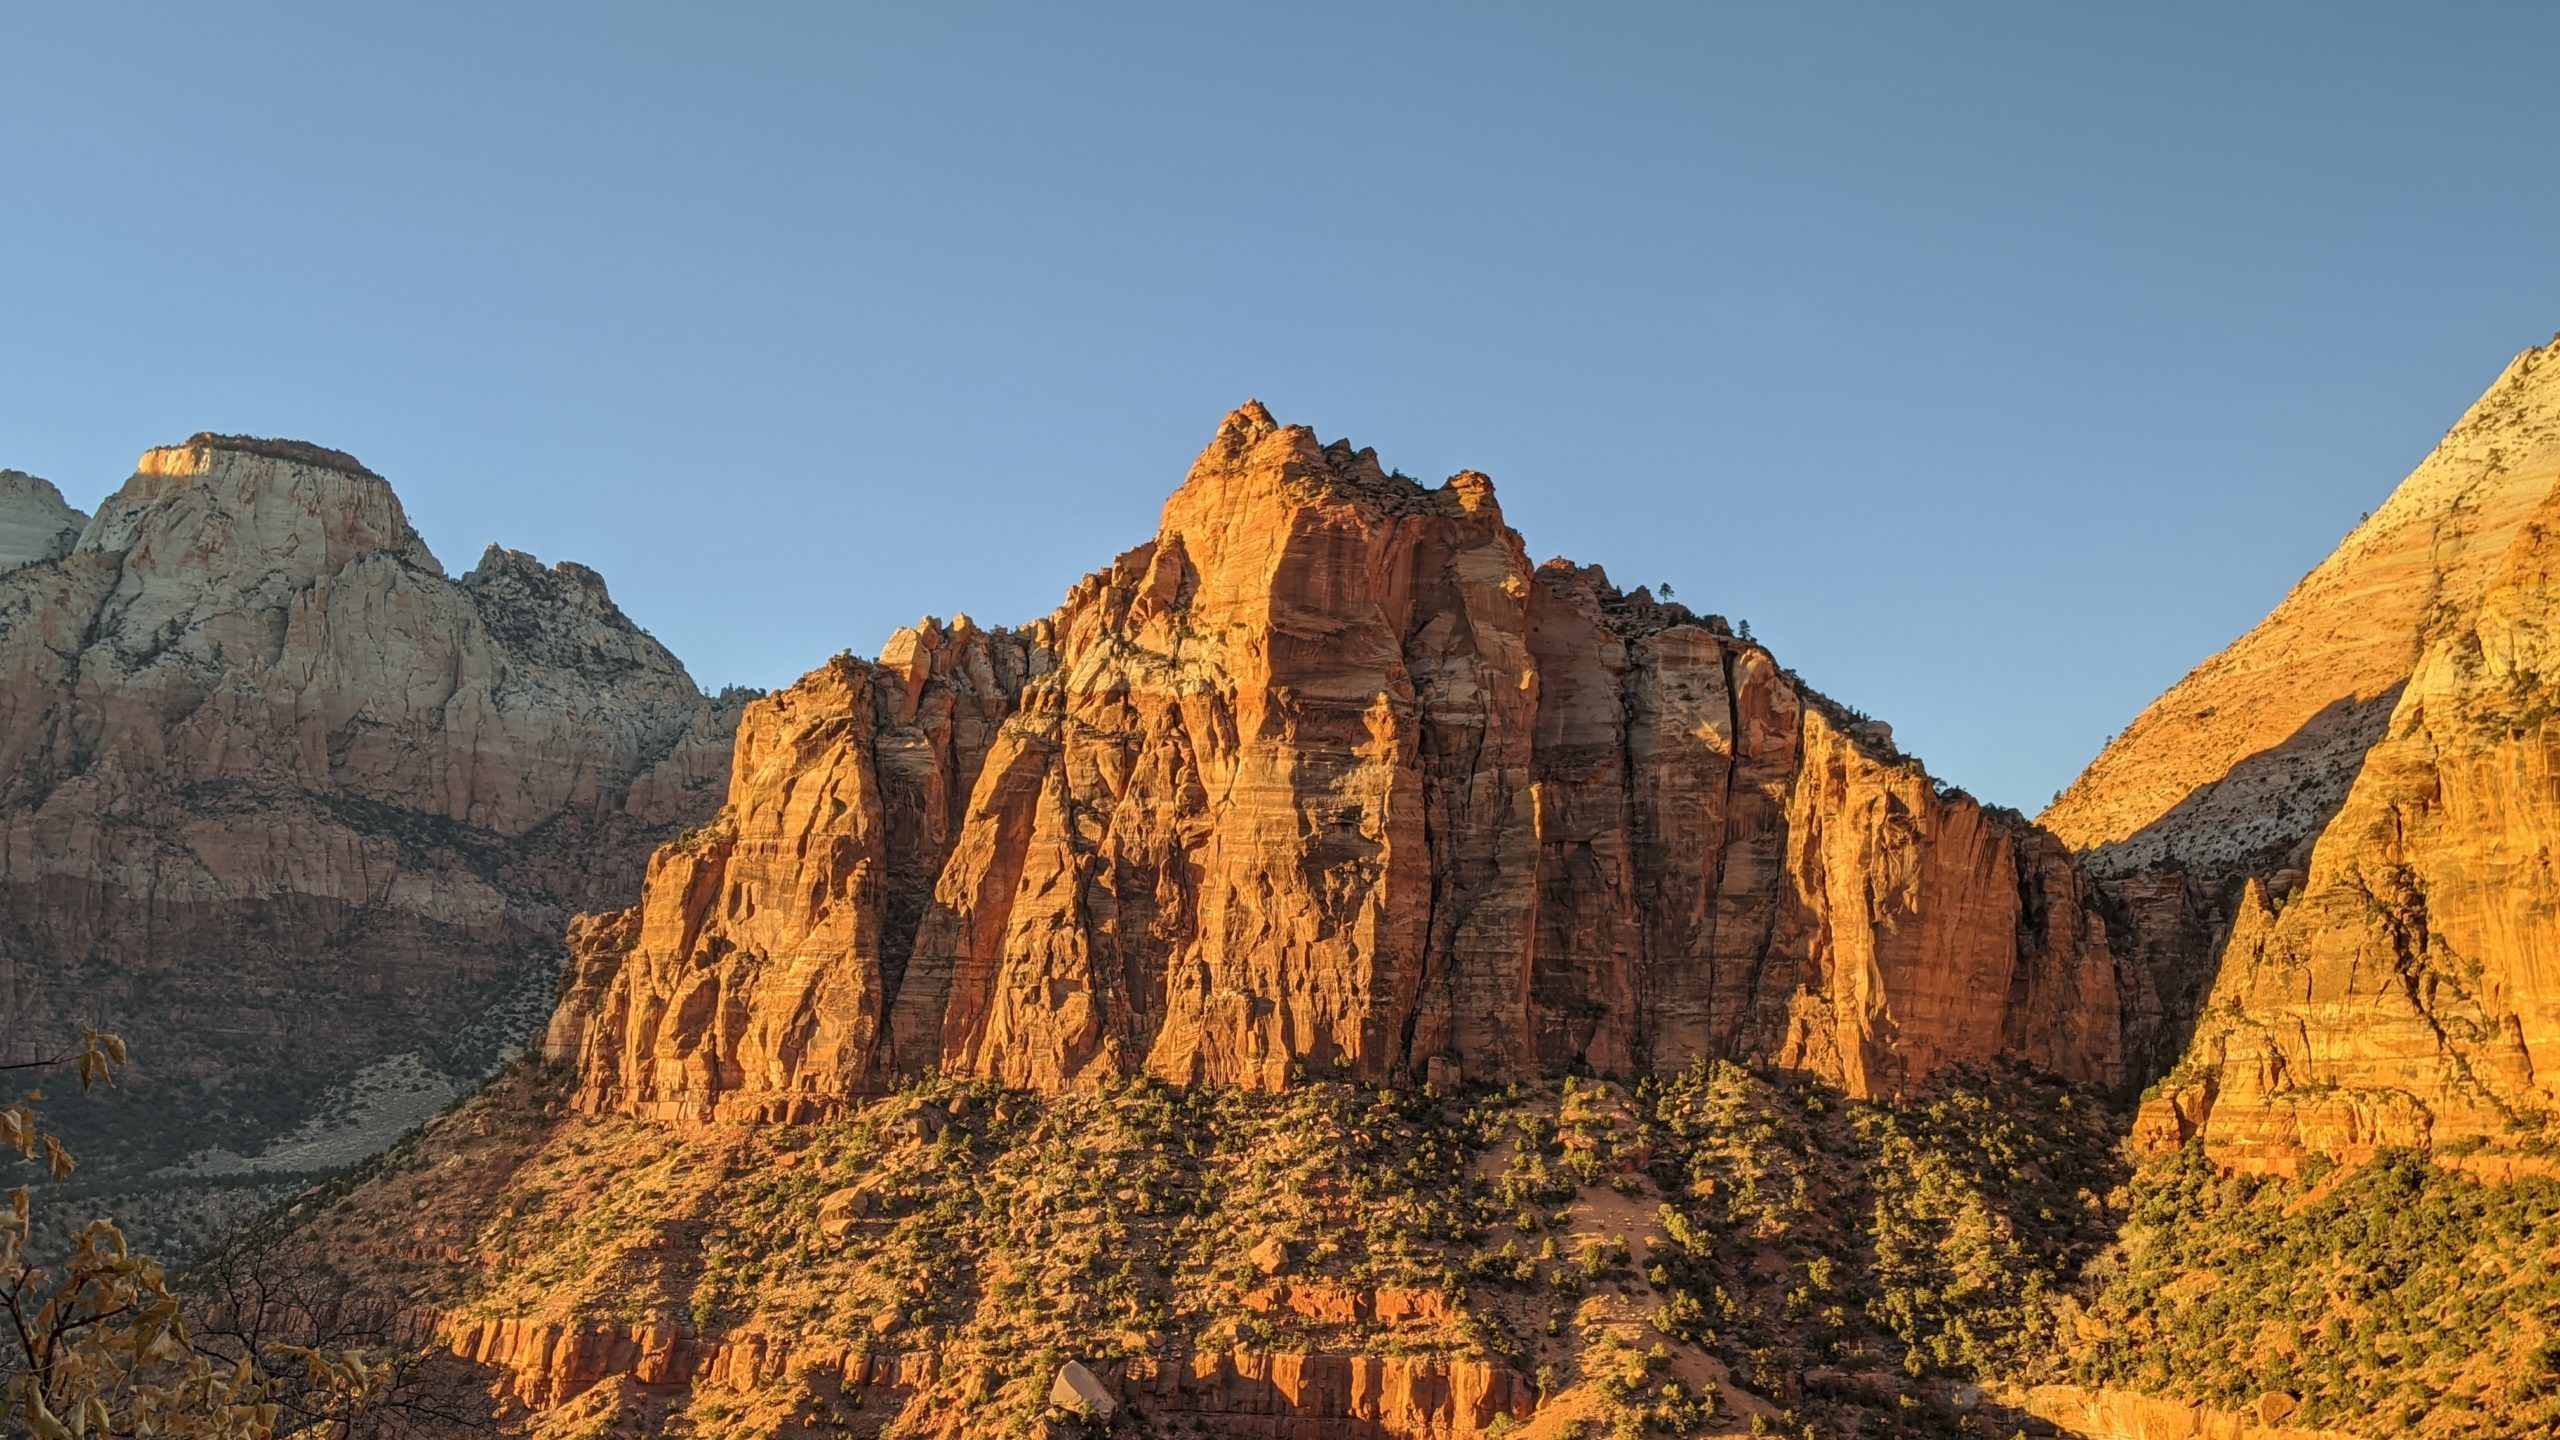 Plan ahead if you're heading to Zion National Park this weekend. Zion is expecting crowds some park...